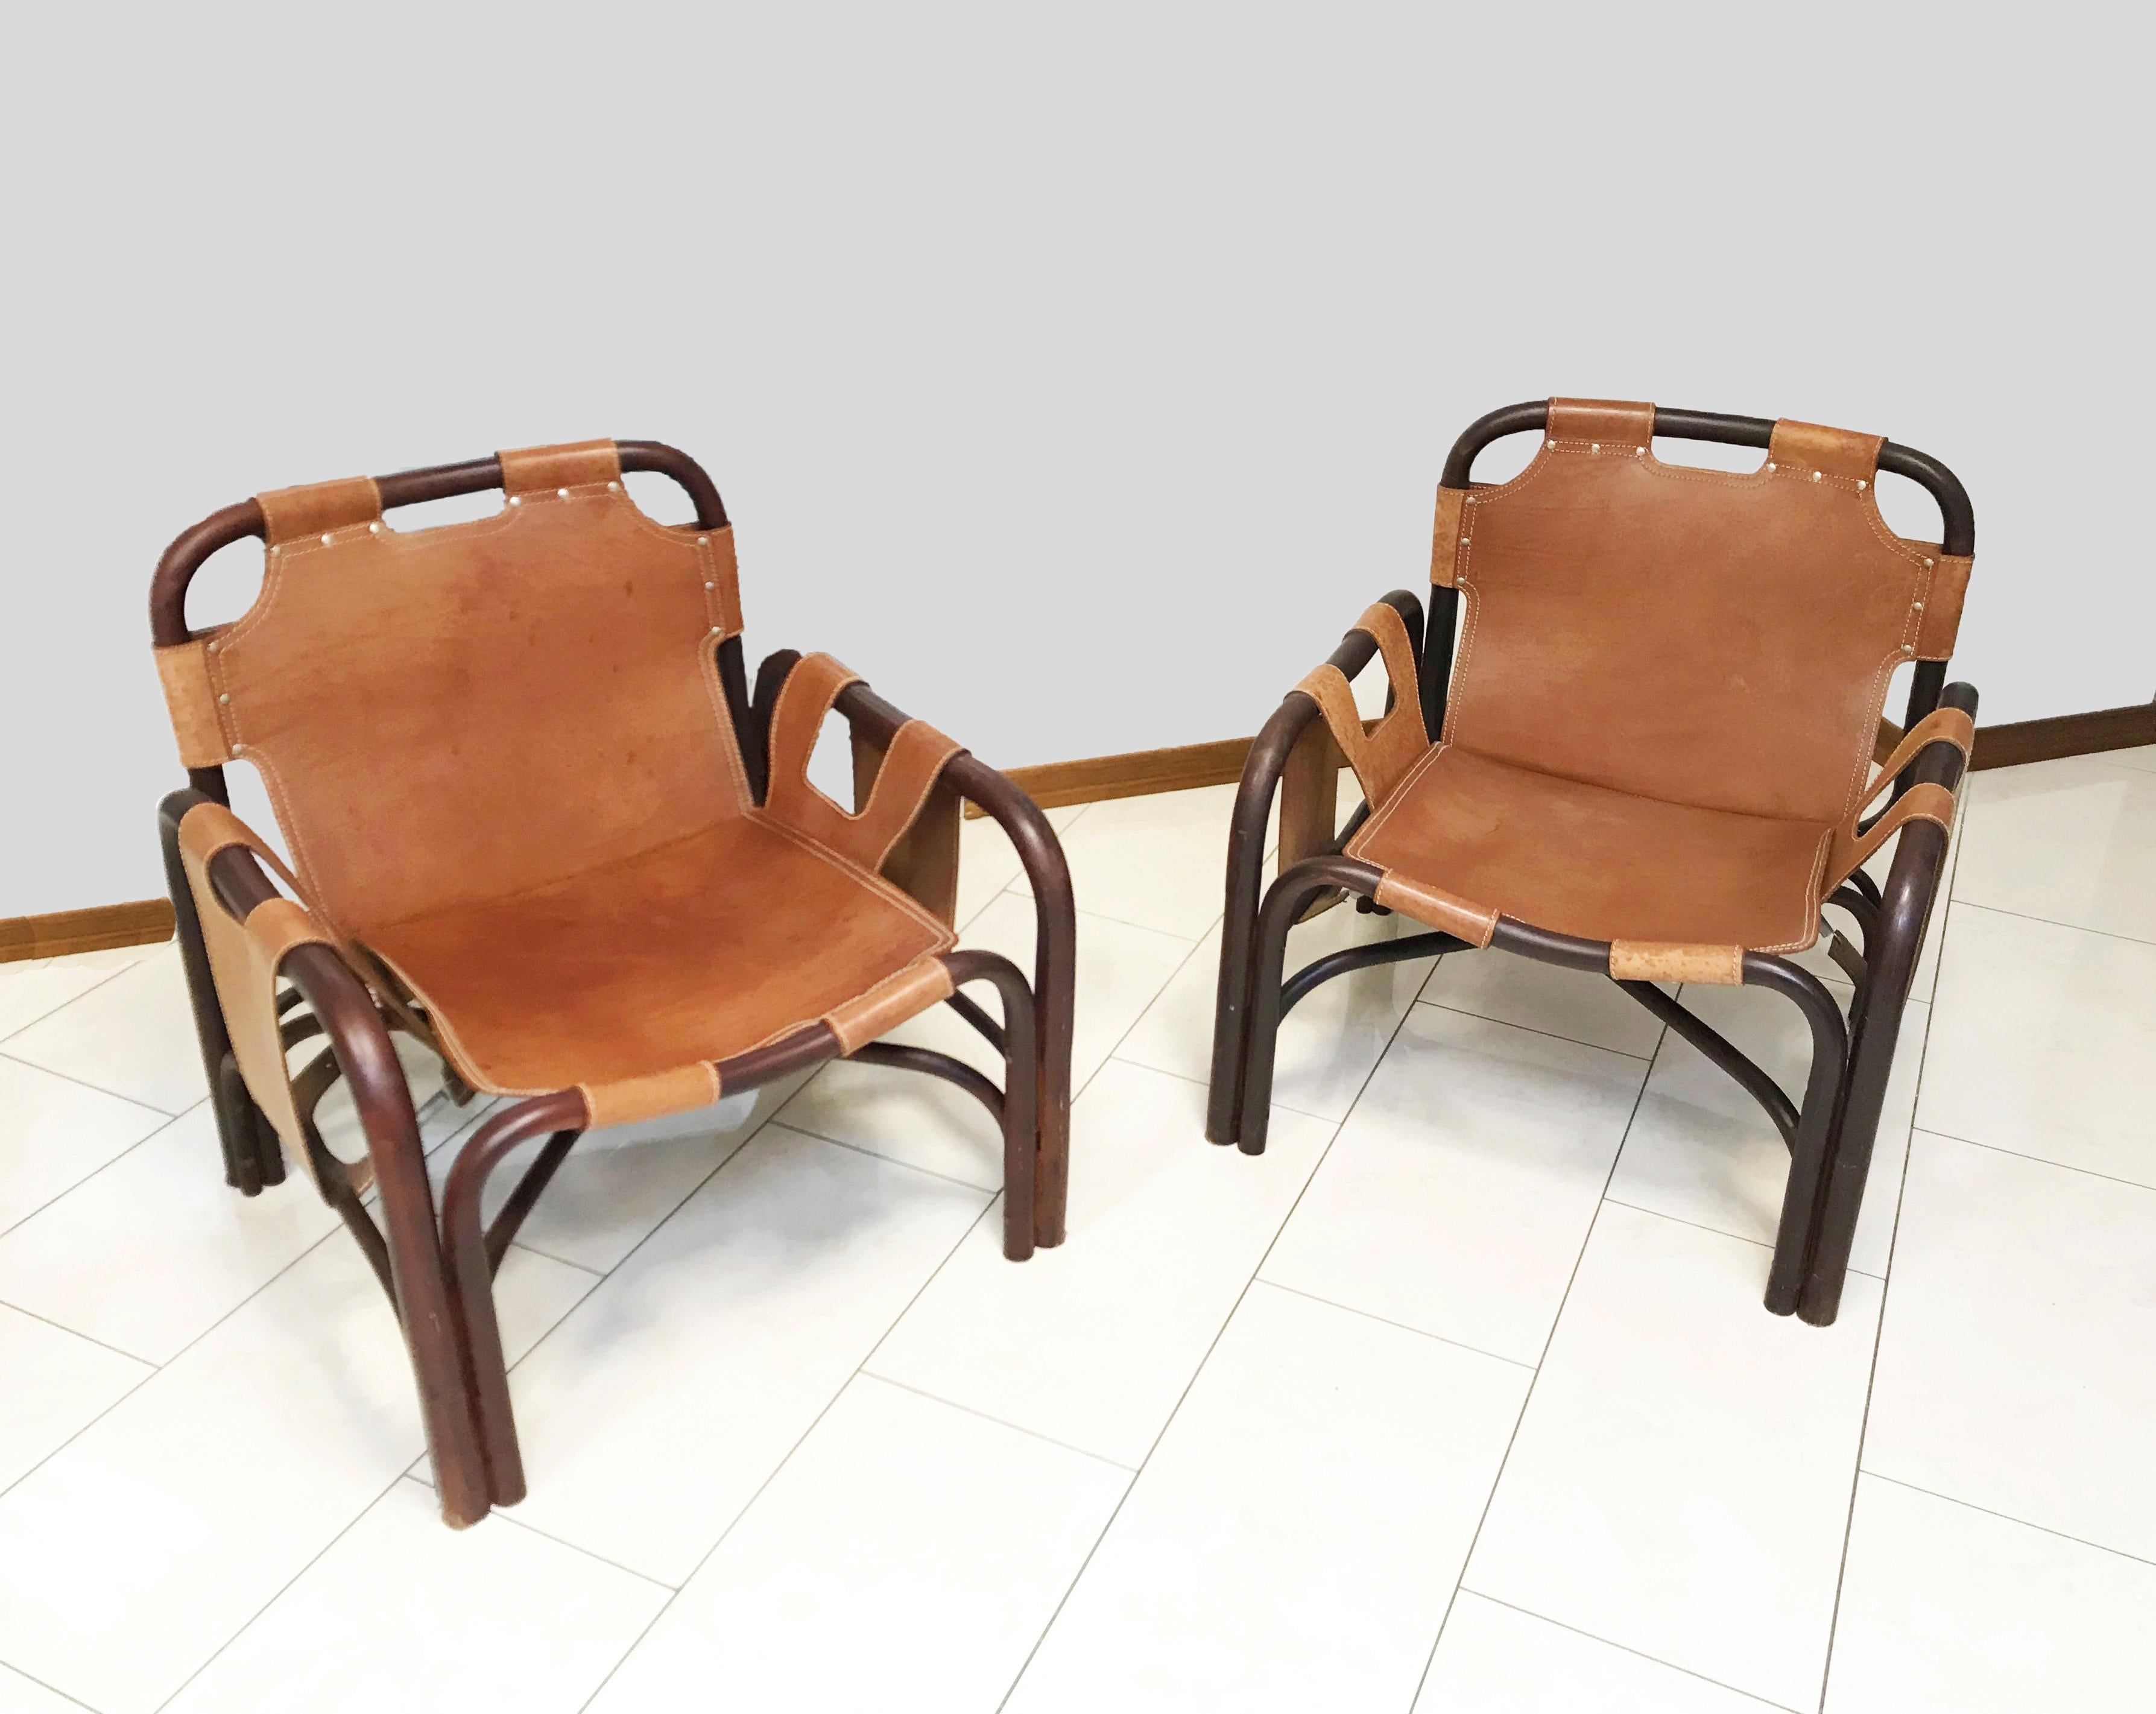 Tito Agnoli for Bonacina, Italy, 1960. Set of two rattan and leather armchairs. completely original. Good conditions. Some spots on the skin.